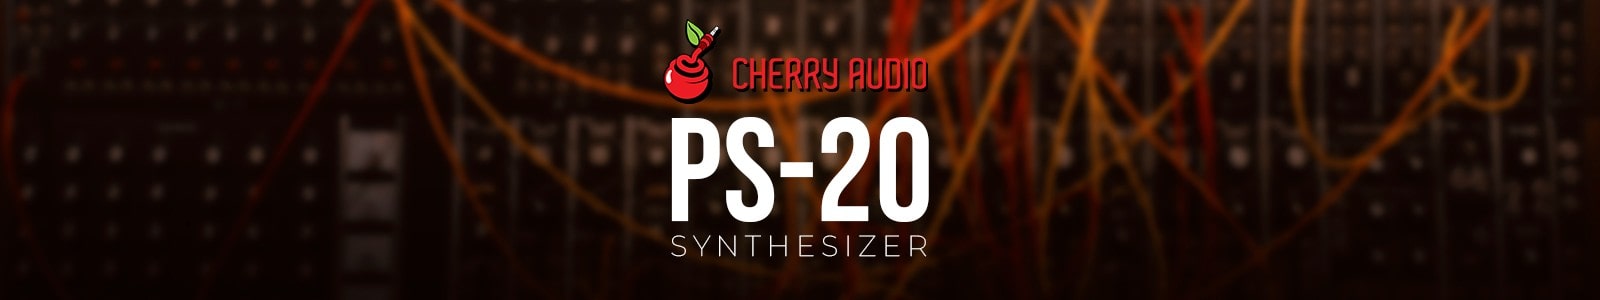 ps-20 synth